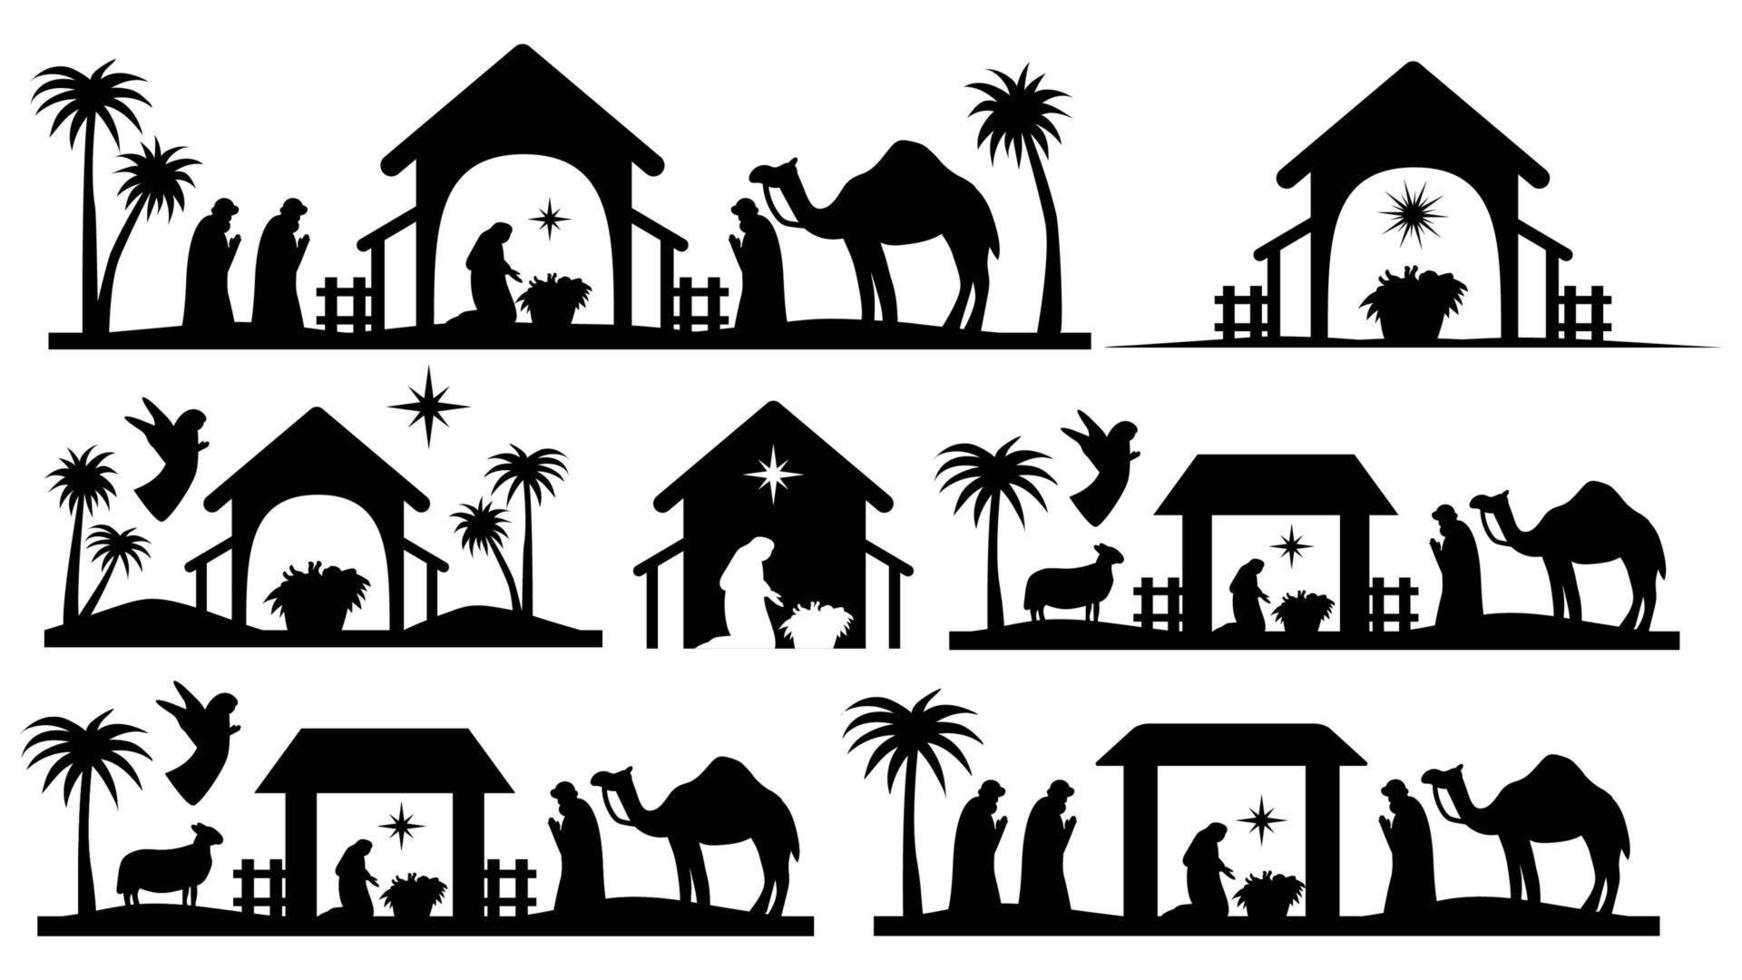 Holy night of birth of child jesus christ silhouette scene from religion christianity nativity scene. Biblical Religious History of Catholics. Cut for scrapbooking and print. Vector illustration.